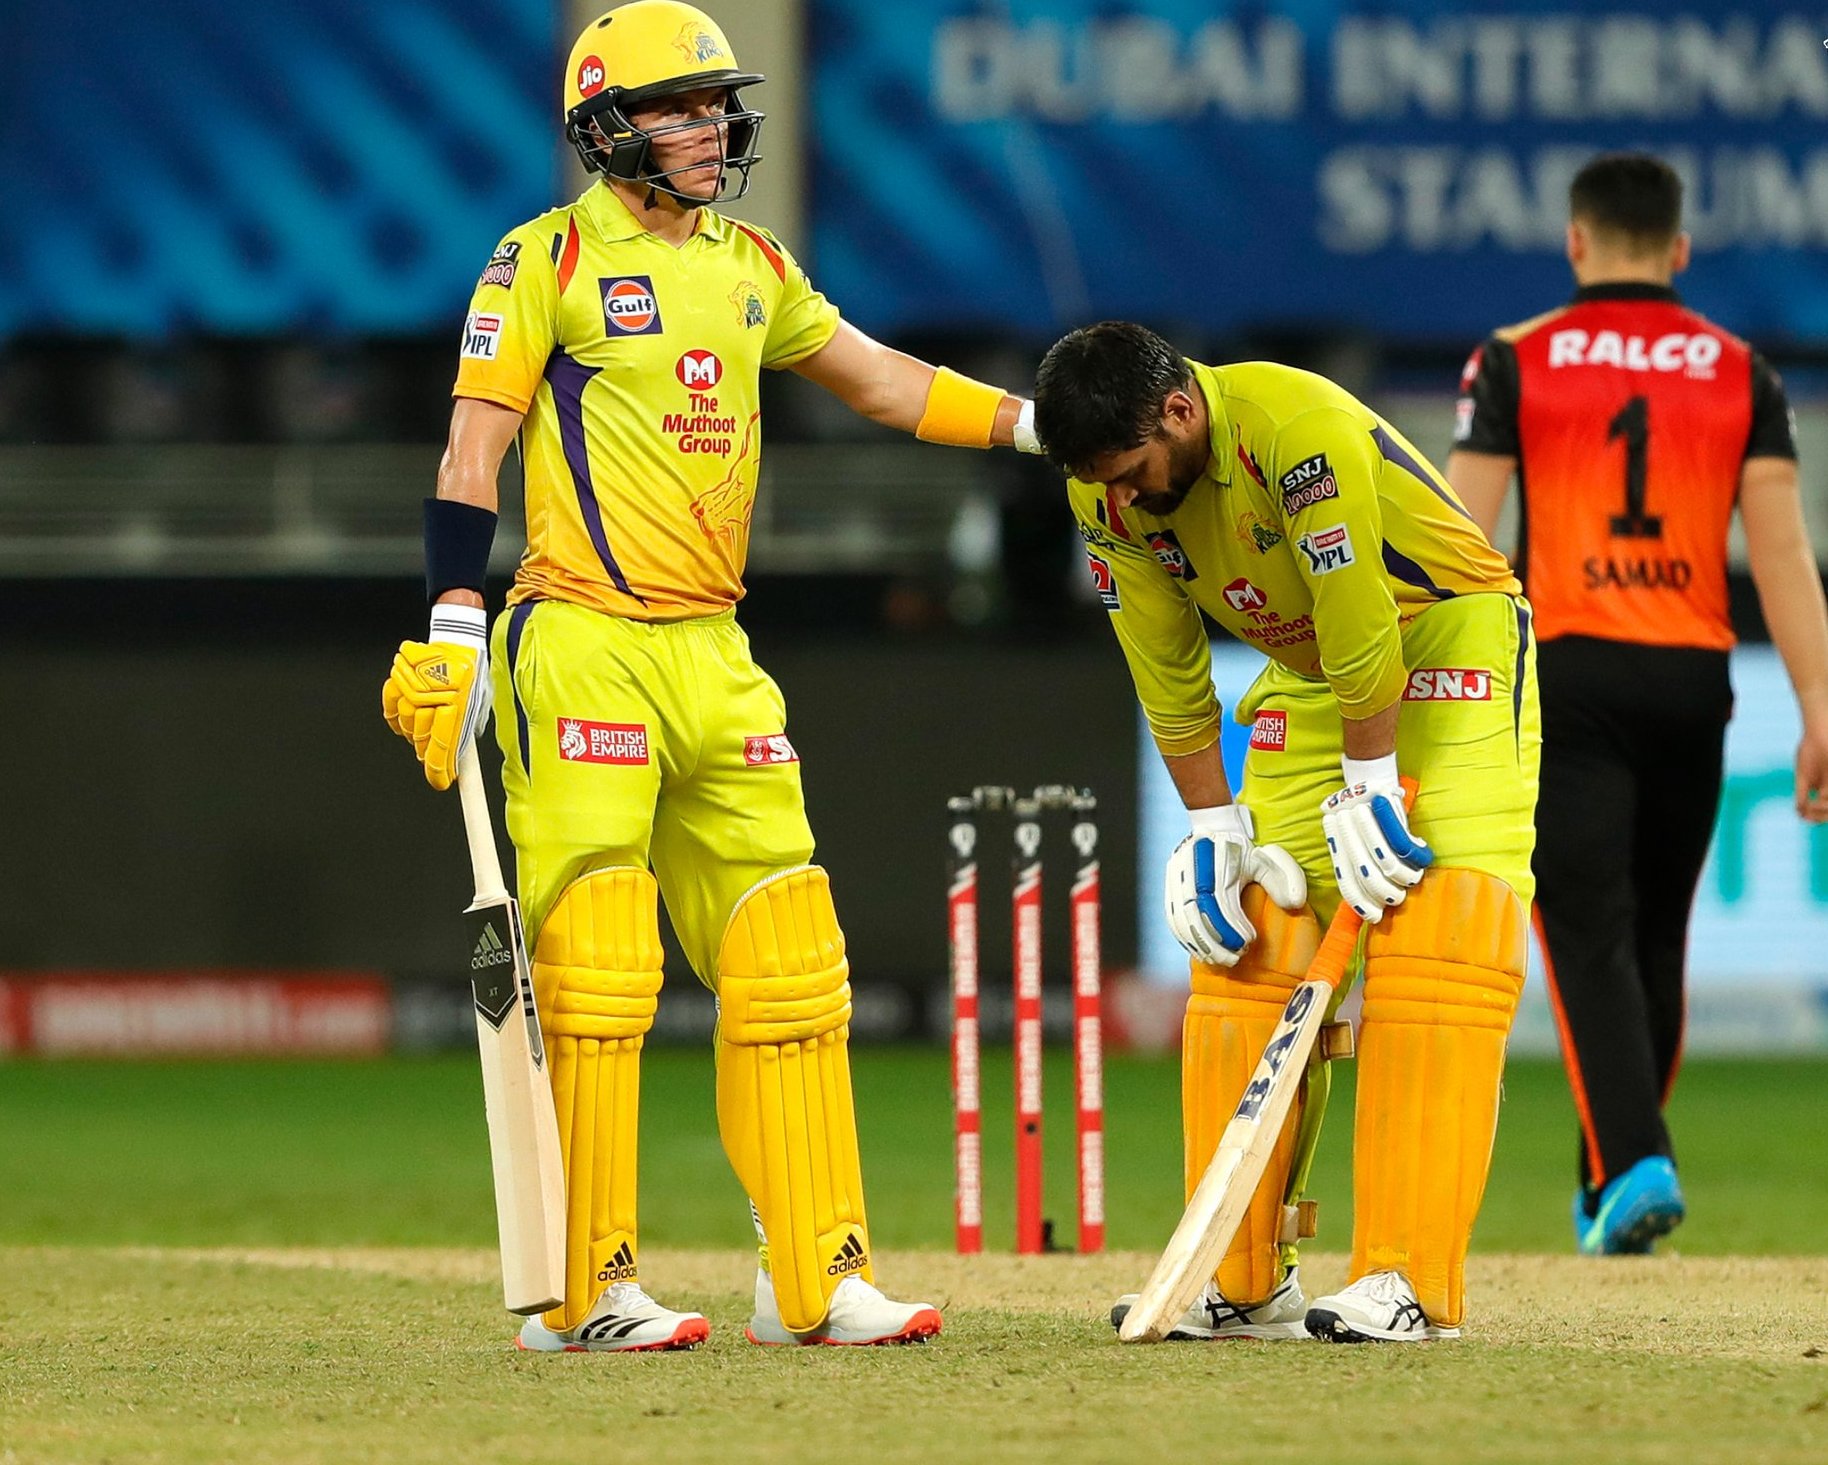 MS Dhoni failed to take his team over the line against SRH | CSK/Twitter